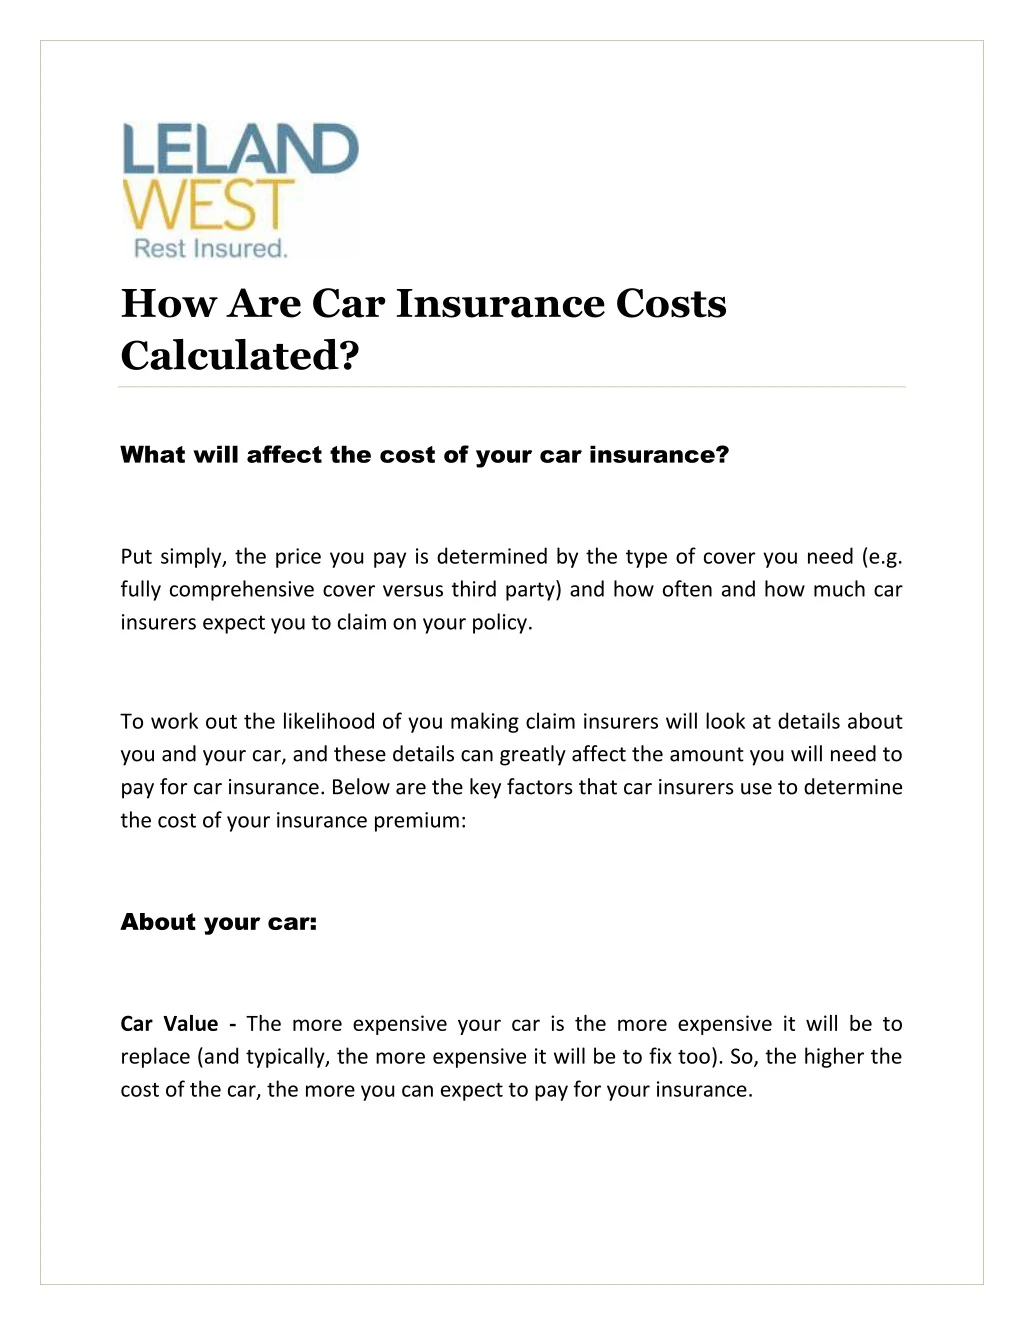 how are car insurance costs calculated